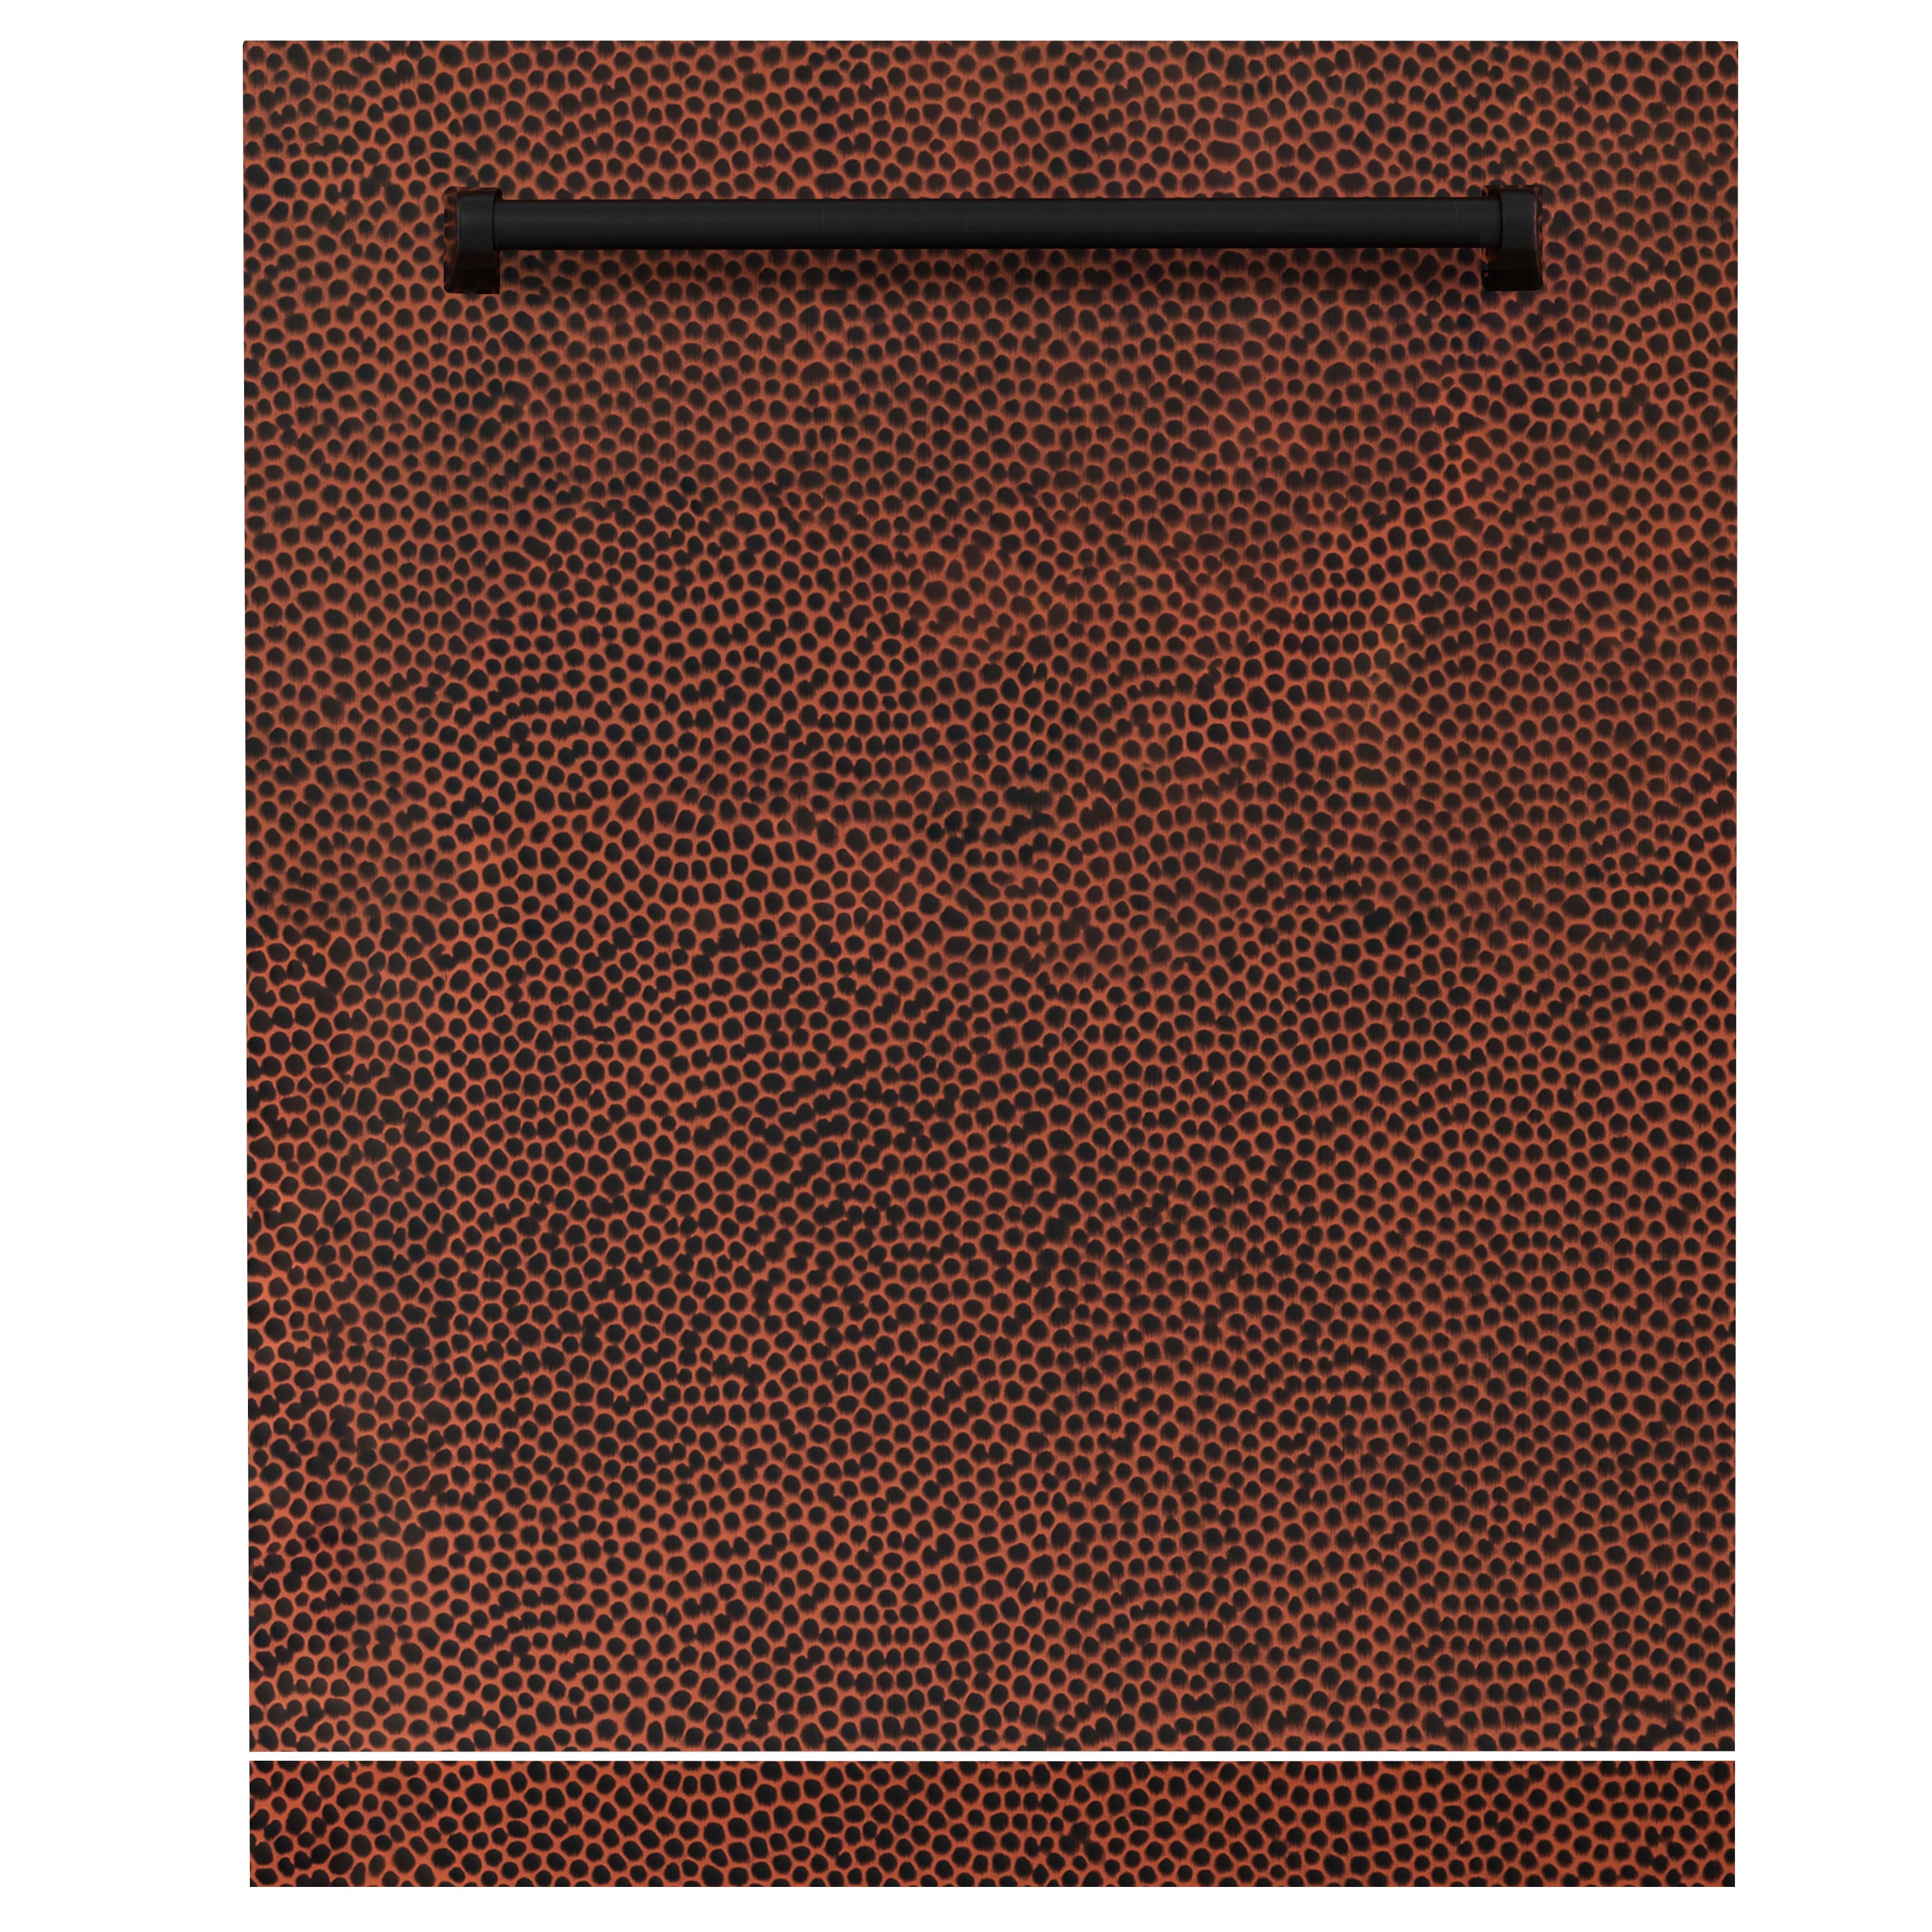 ZLINE 24" Monument Dishwasher Panel in Hand Hammered Copper with Traditional Handle (DPMT-HH-24)